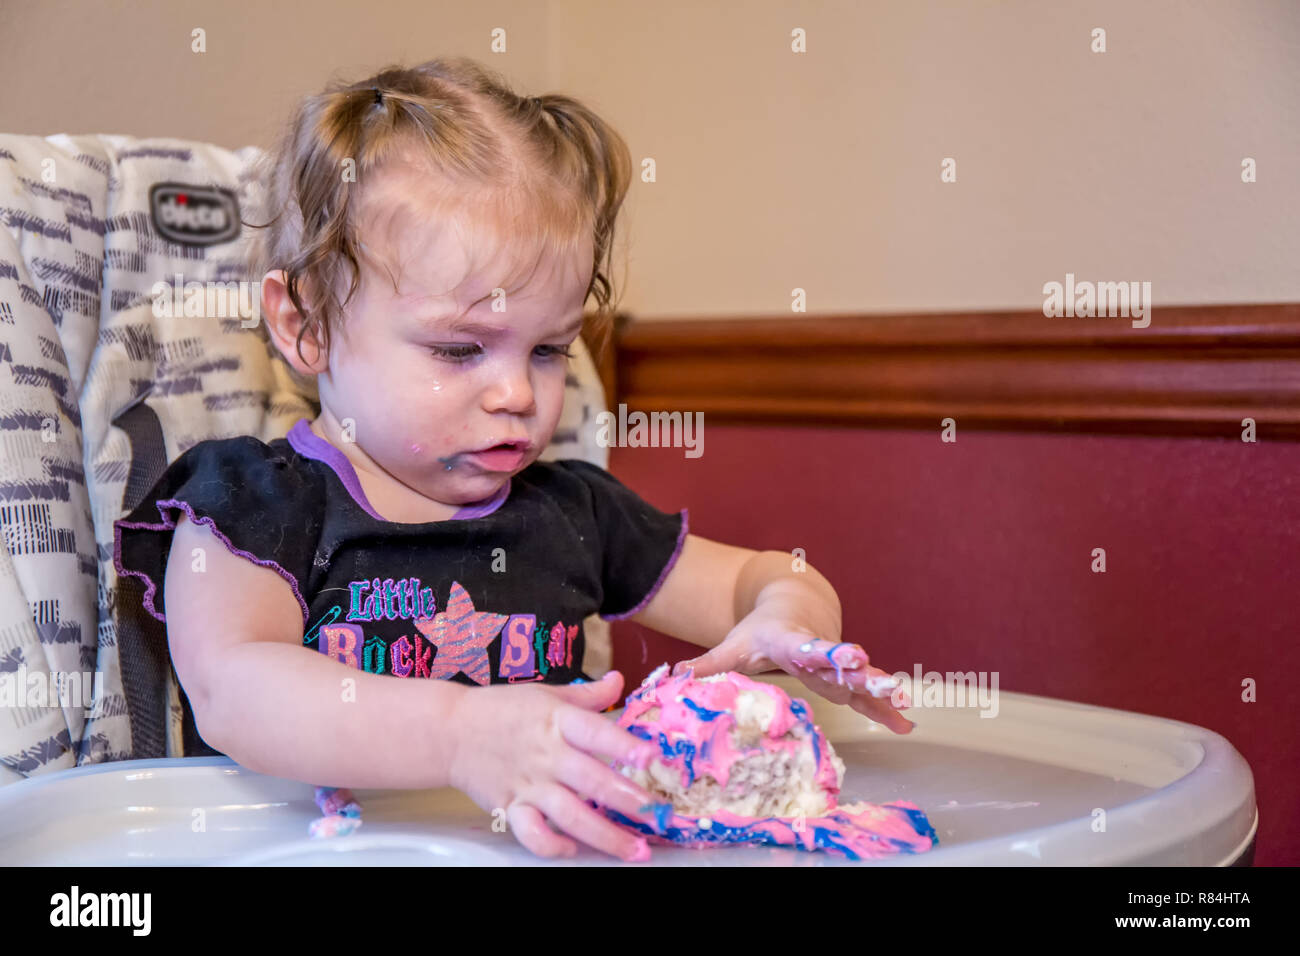 One year old girl discovering how much fun it is to play in one's birthday cake.  (MR) Stock Photo